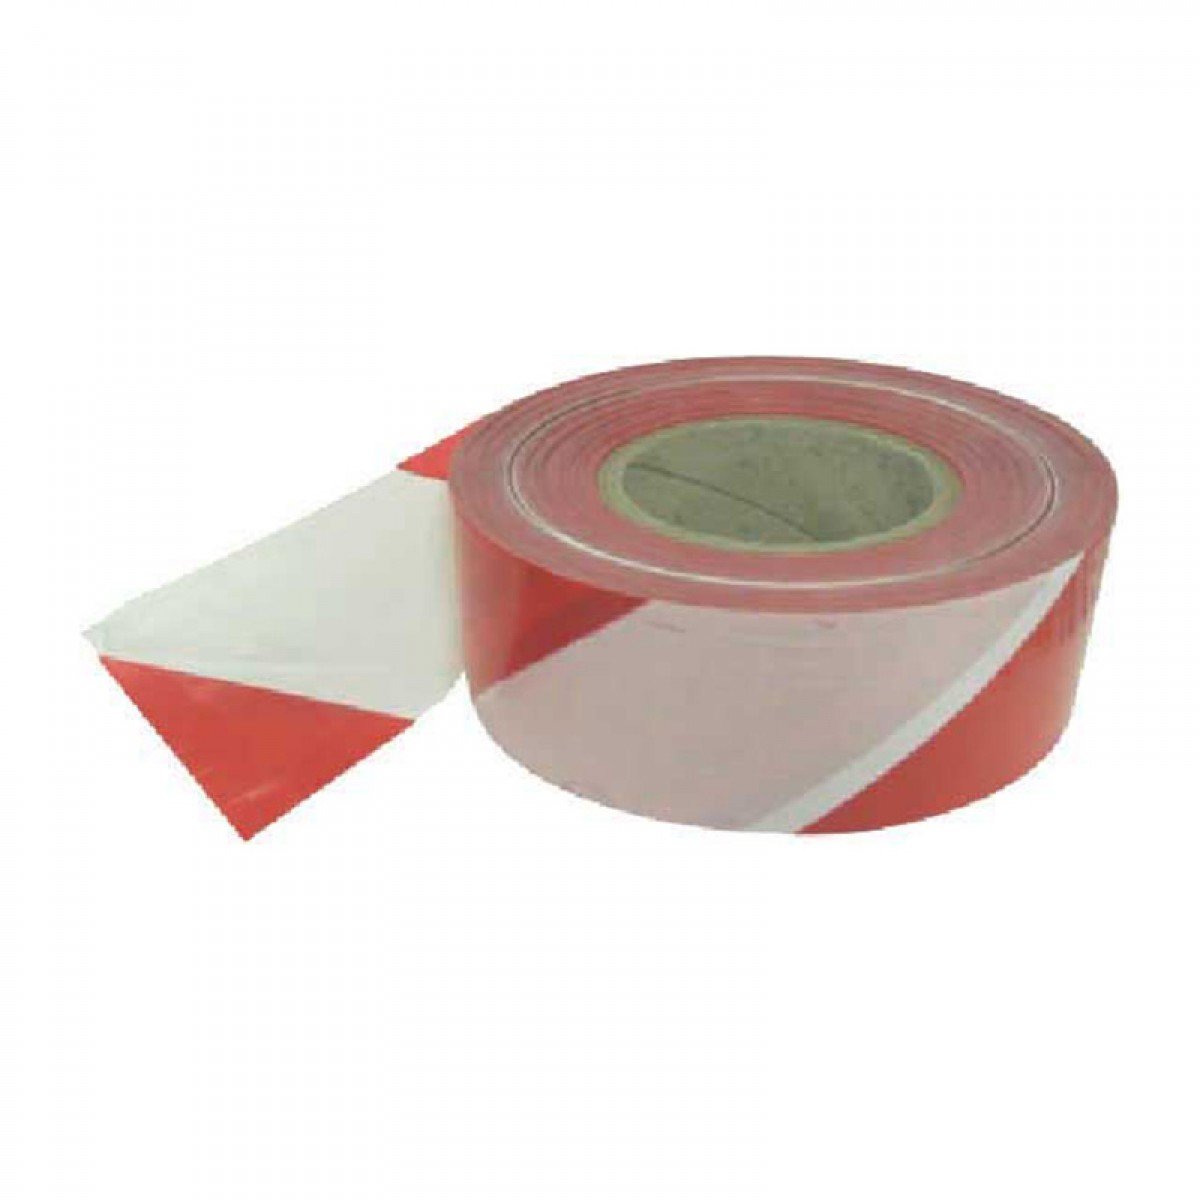 Red/White Striped Tape, Non Adhesive (70mm x 500m)